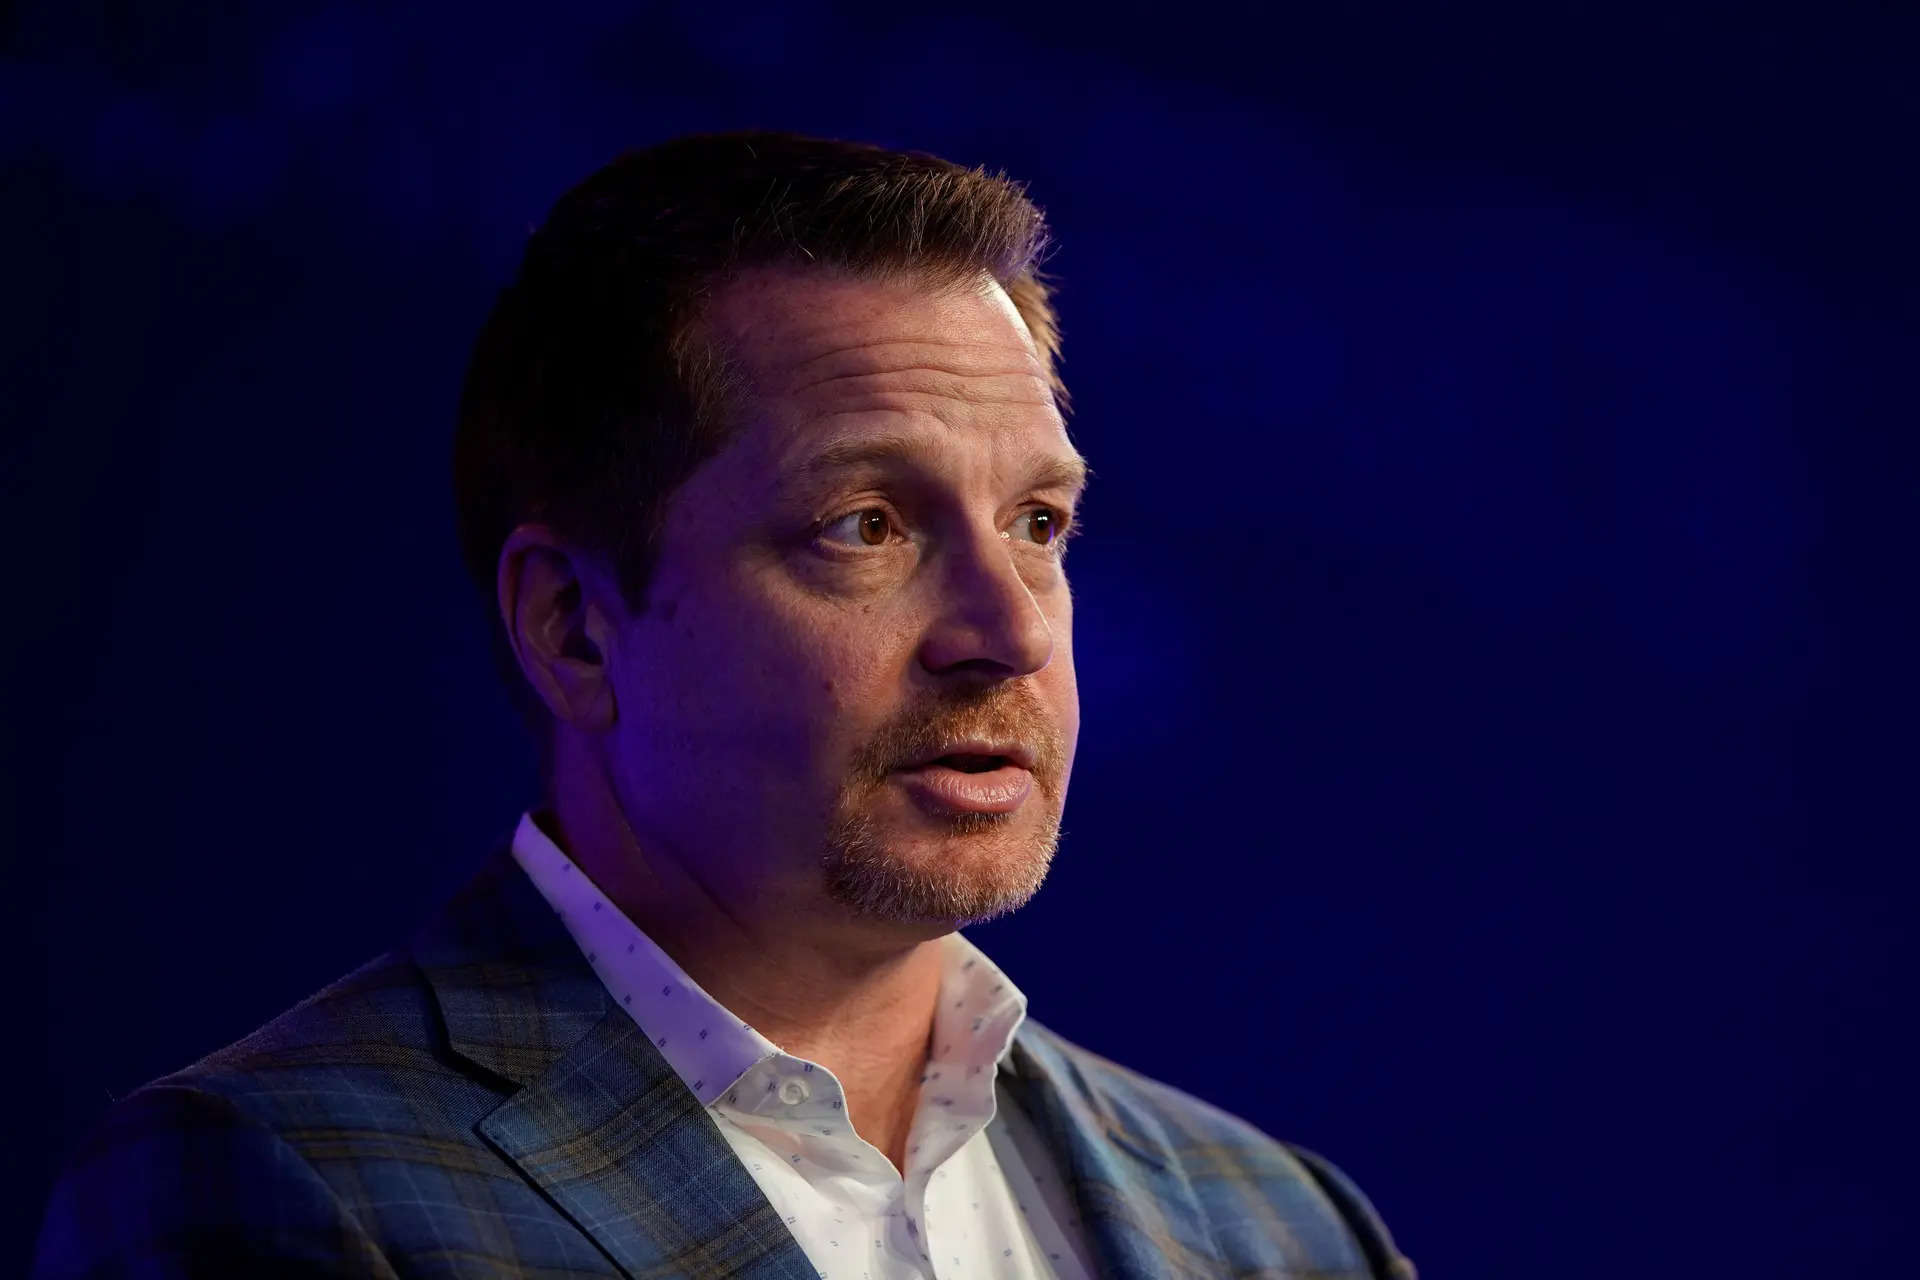 US congressional panel calls on CrowdStrike CEO to testify on outage 